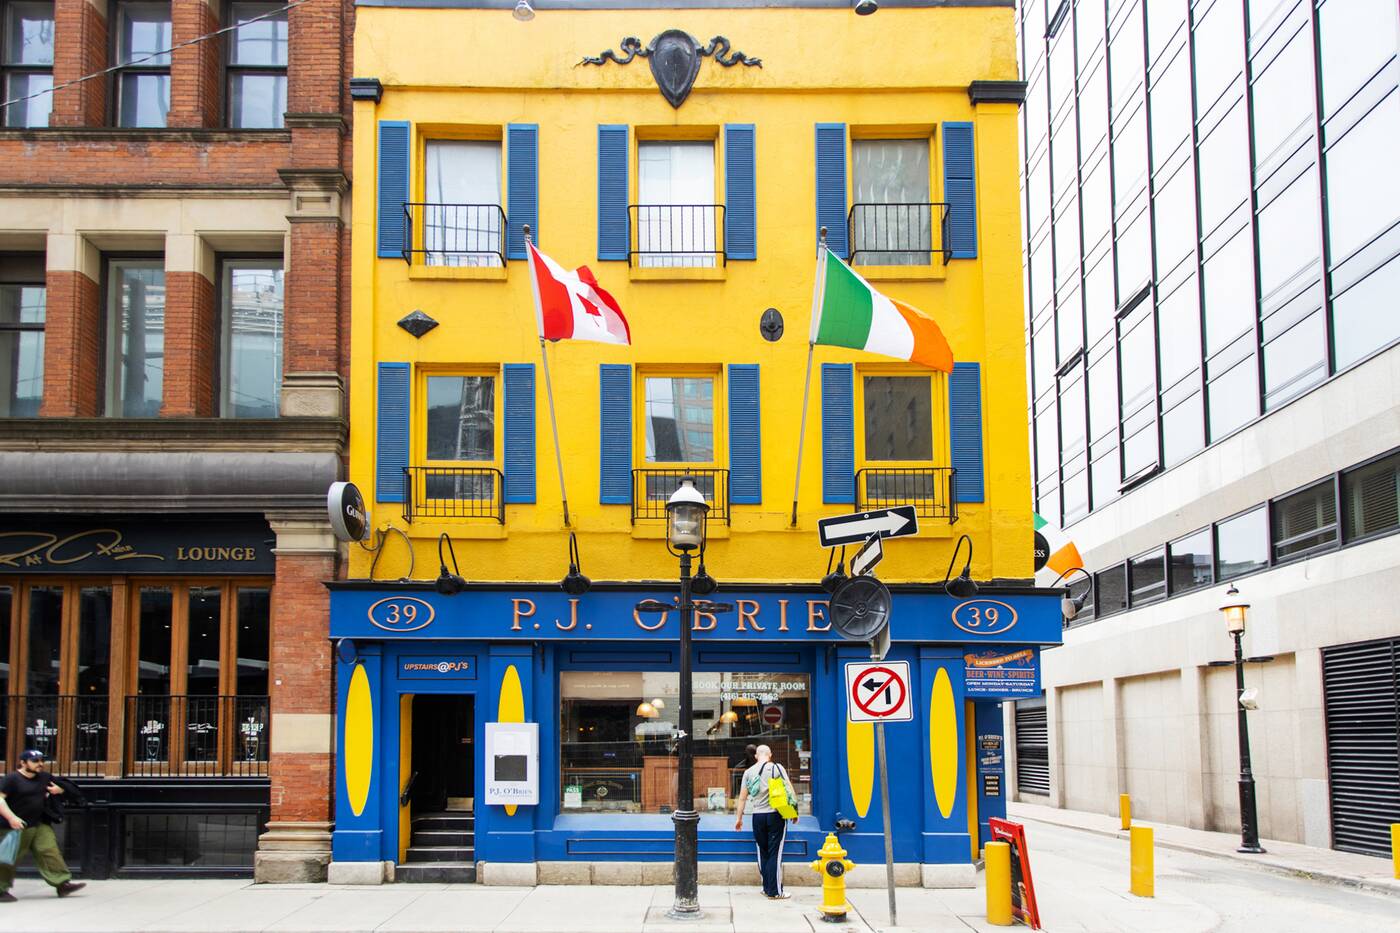 Irish pub famous for its Guinness clock has been a Toronto staple since the 60s